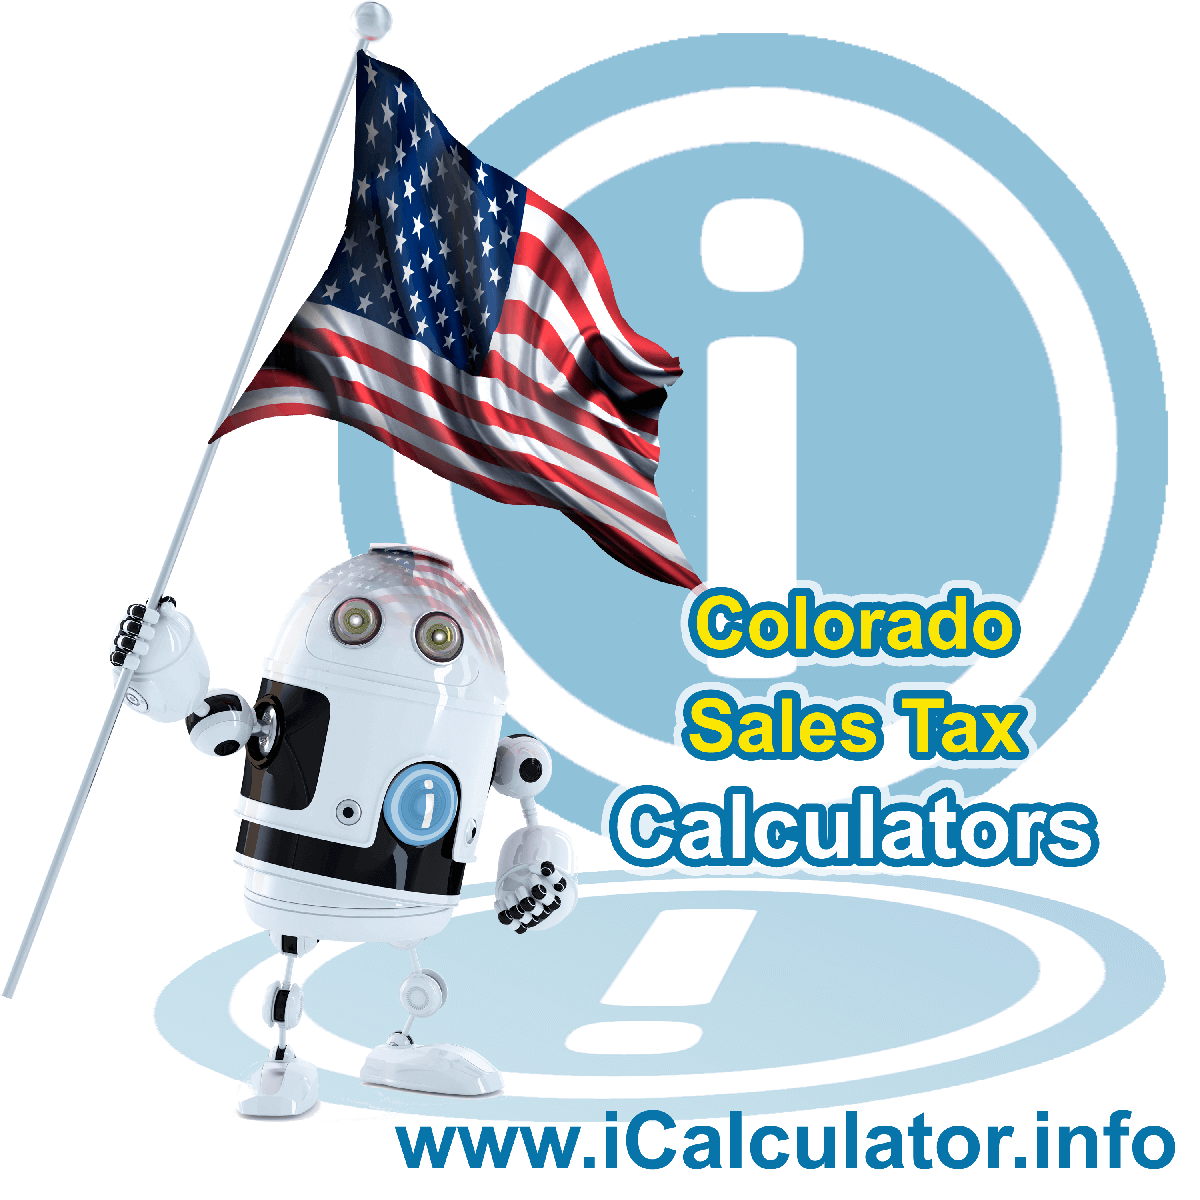 Otero County Sales Rates: This image illustrates a calculator robot calculating Otero County sales tax manually using the Otero County Sales Tax Formula. You can use this information to calculate Otero County Sales Tax manually or use the Otero County Sales Tax Calculator to calculate sales tax online.